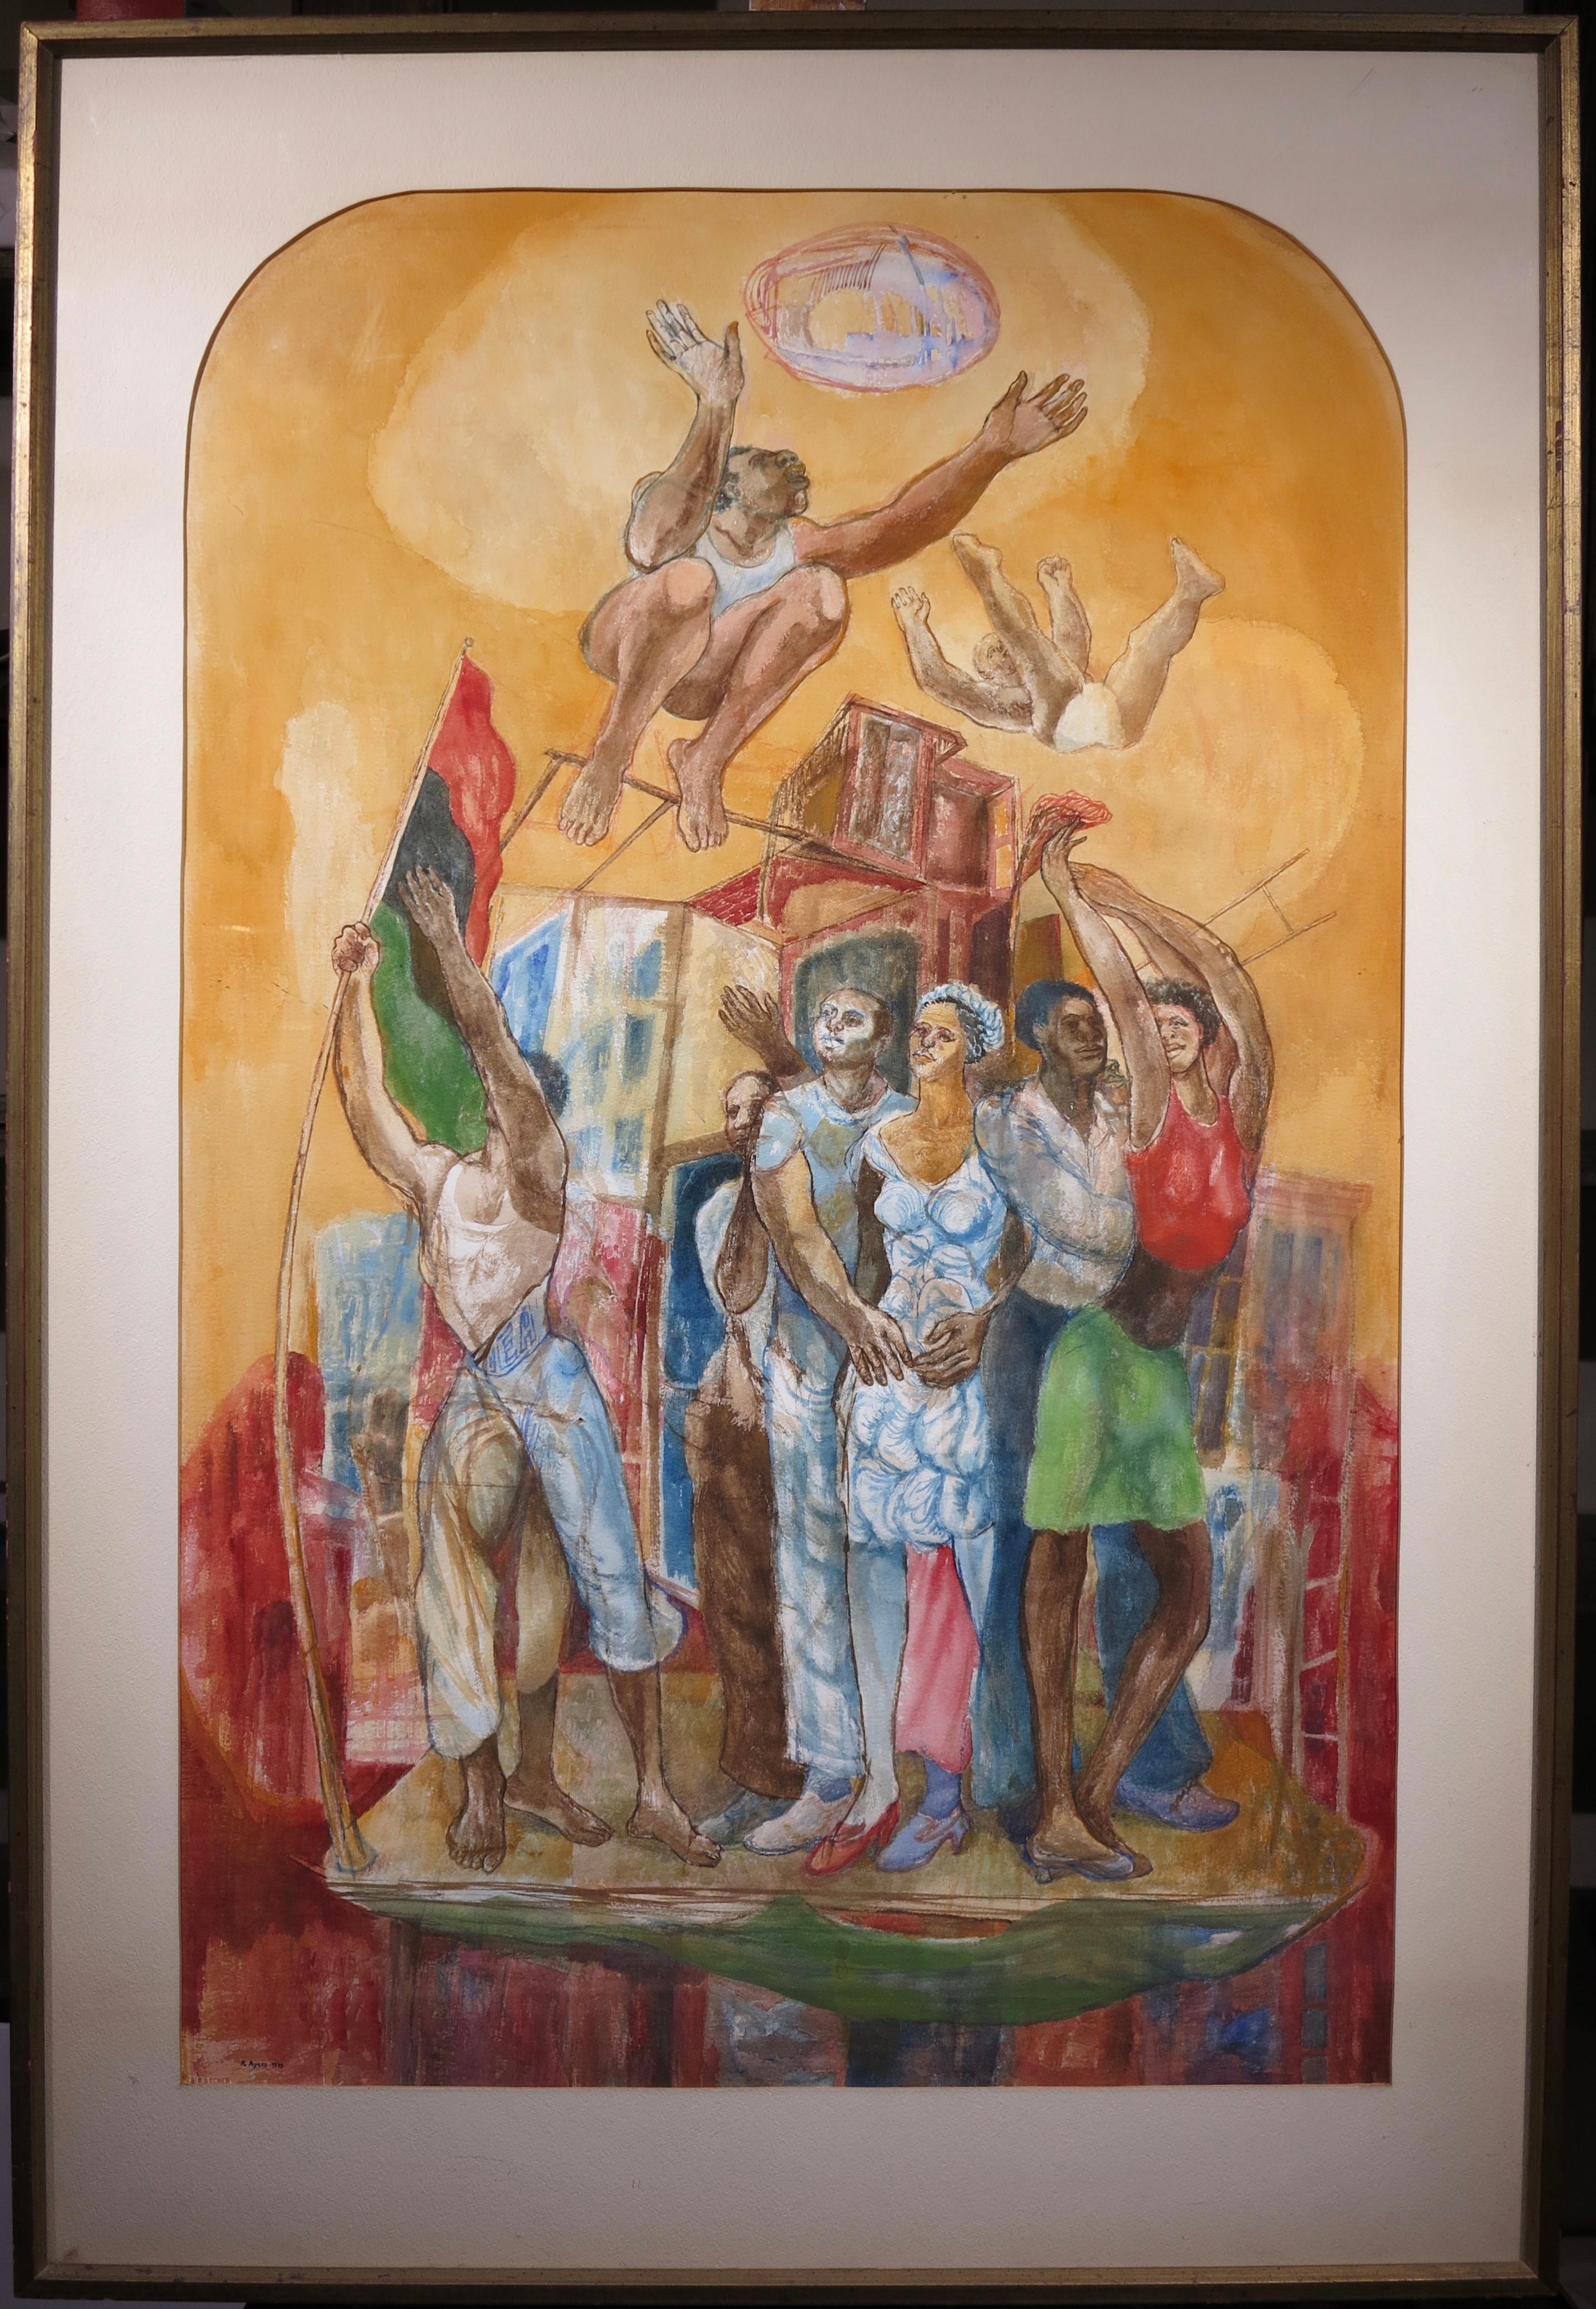 The People (Urban African-American Afrofuturism Landscape) - Painting by Roland Ayers